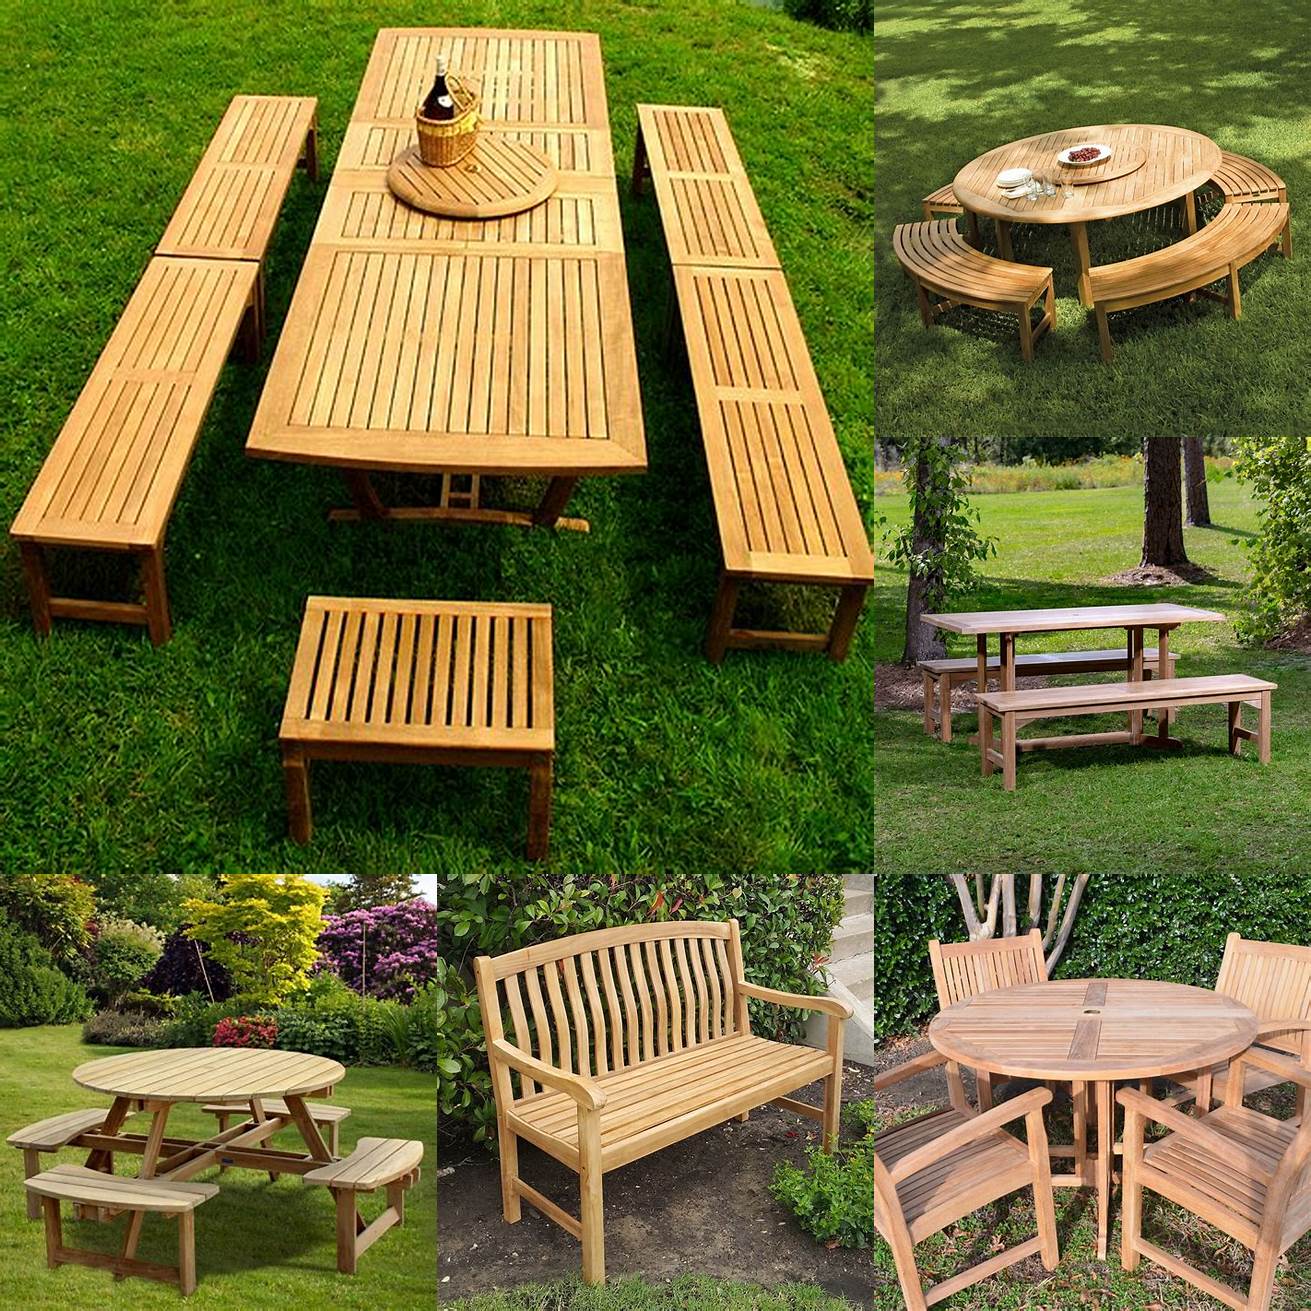 Teak Picnic Table and Benches With Shade